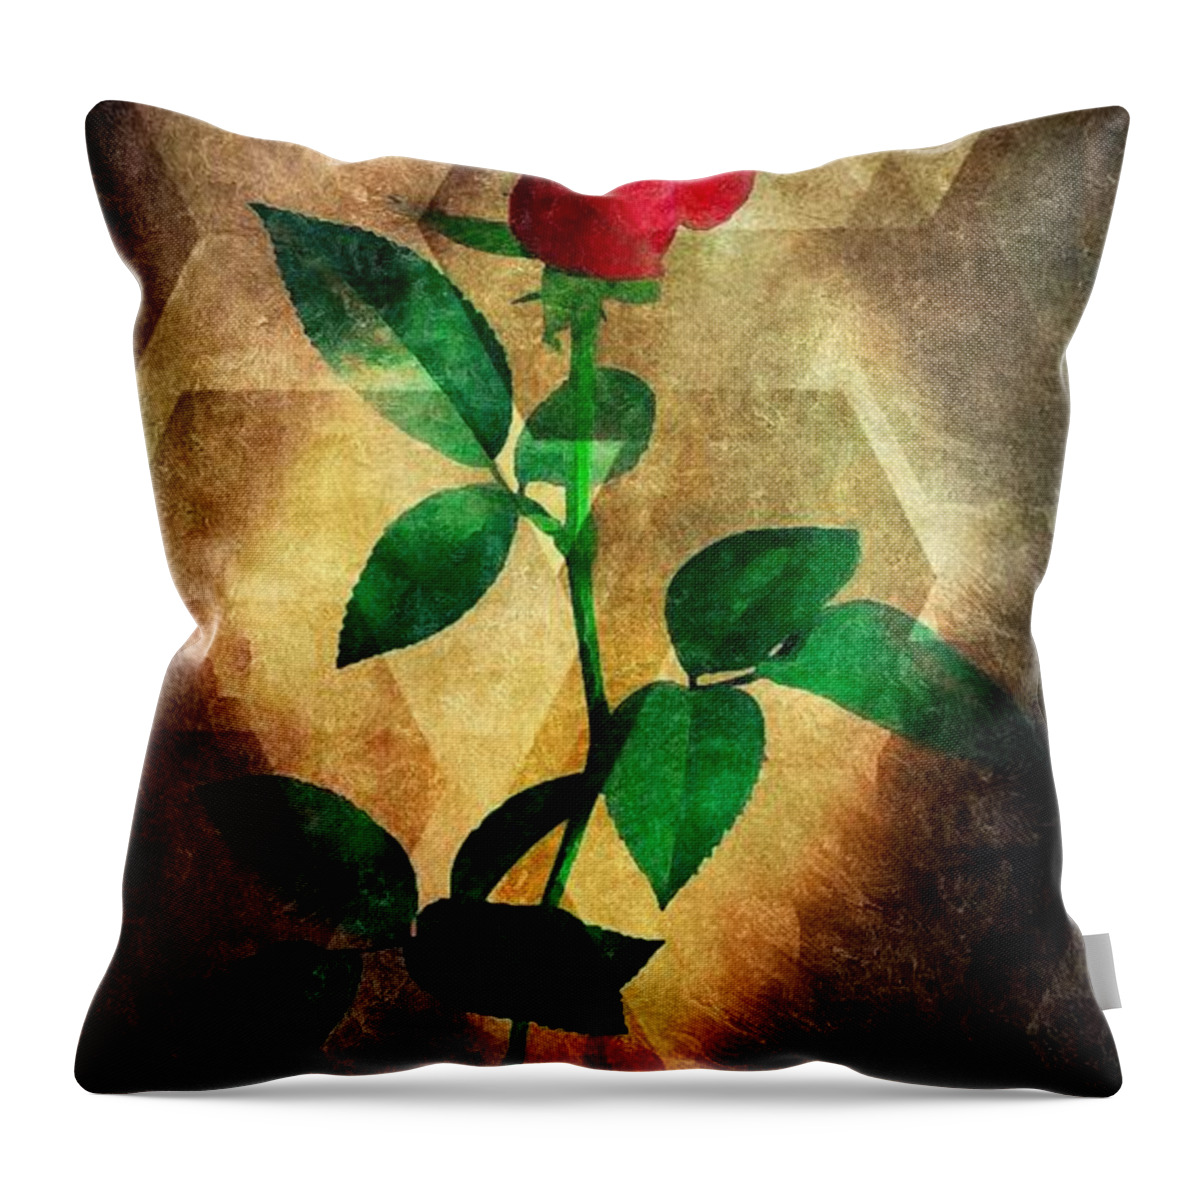 Love's Enchantment Throw Pillow featuring the digital art Love's Enchantment by Maria Urso